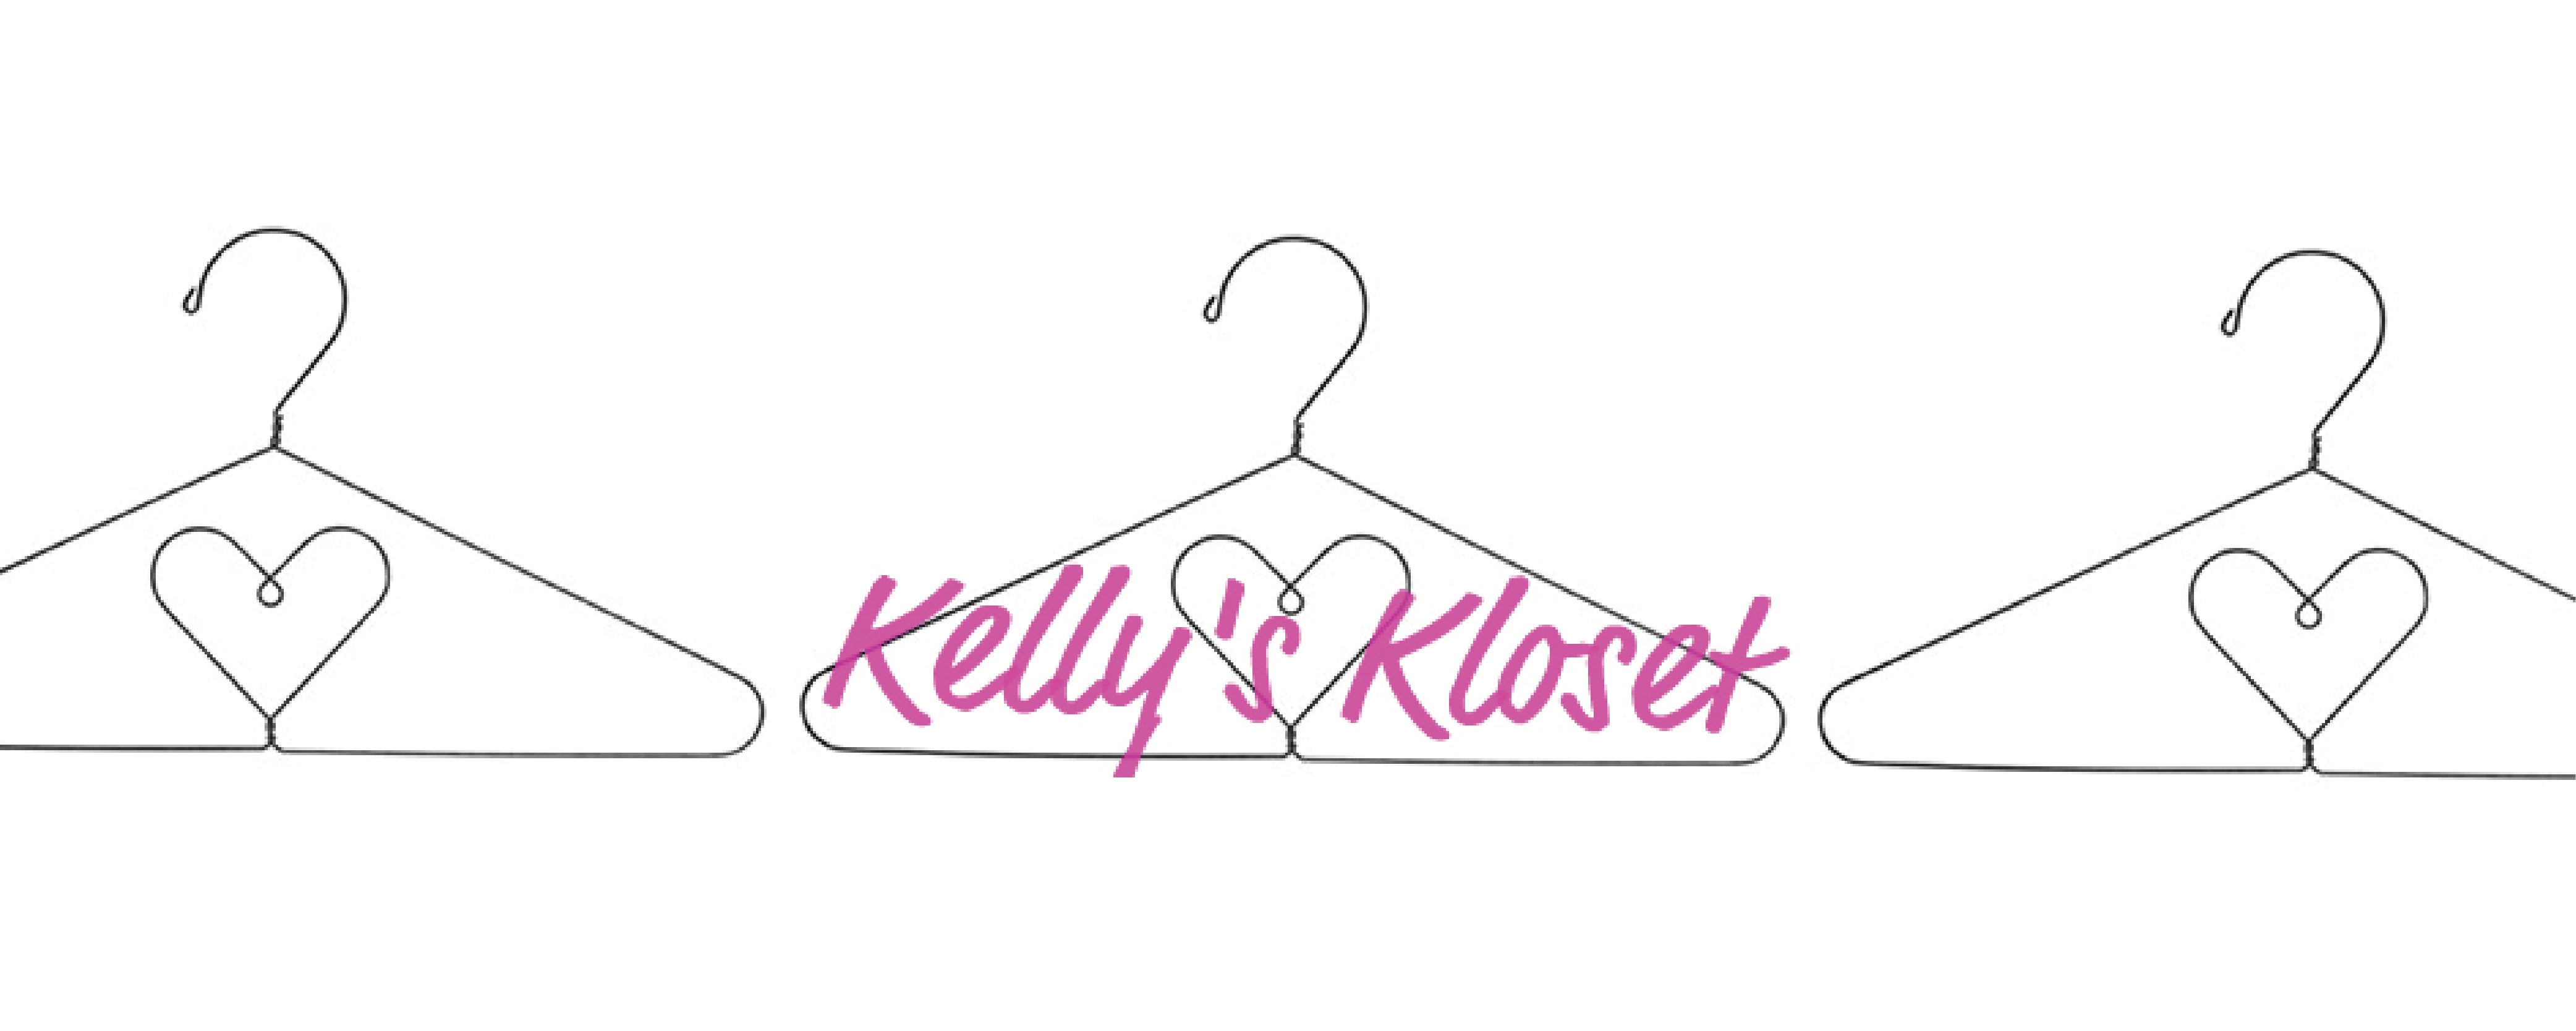 Kelly's Kloset - Deal of the Day